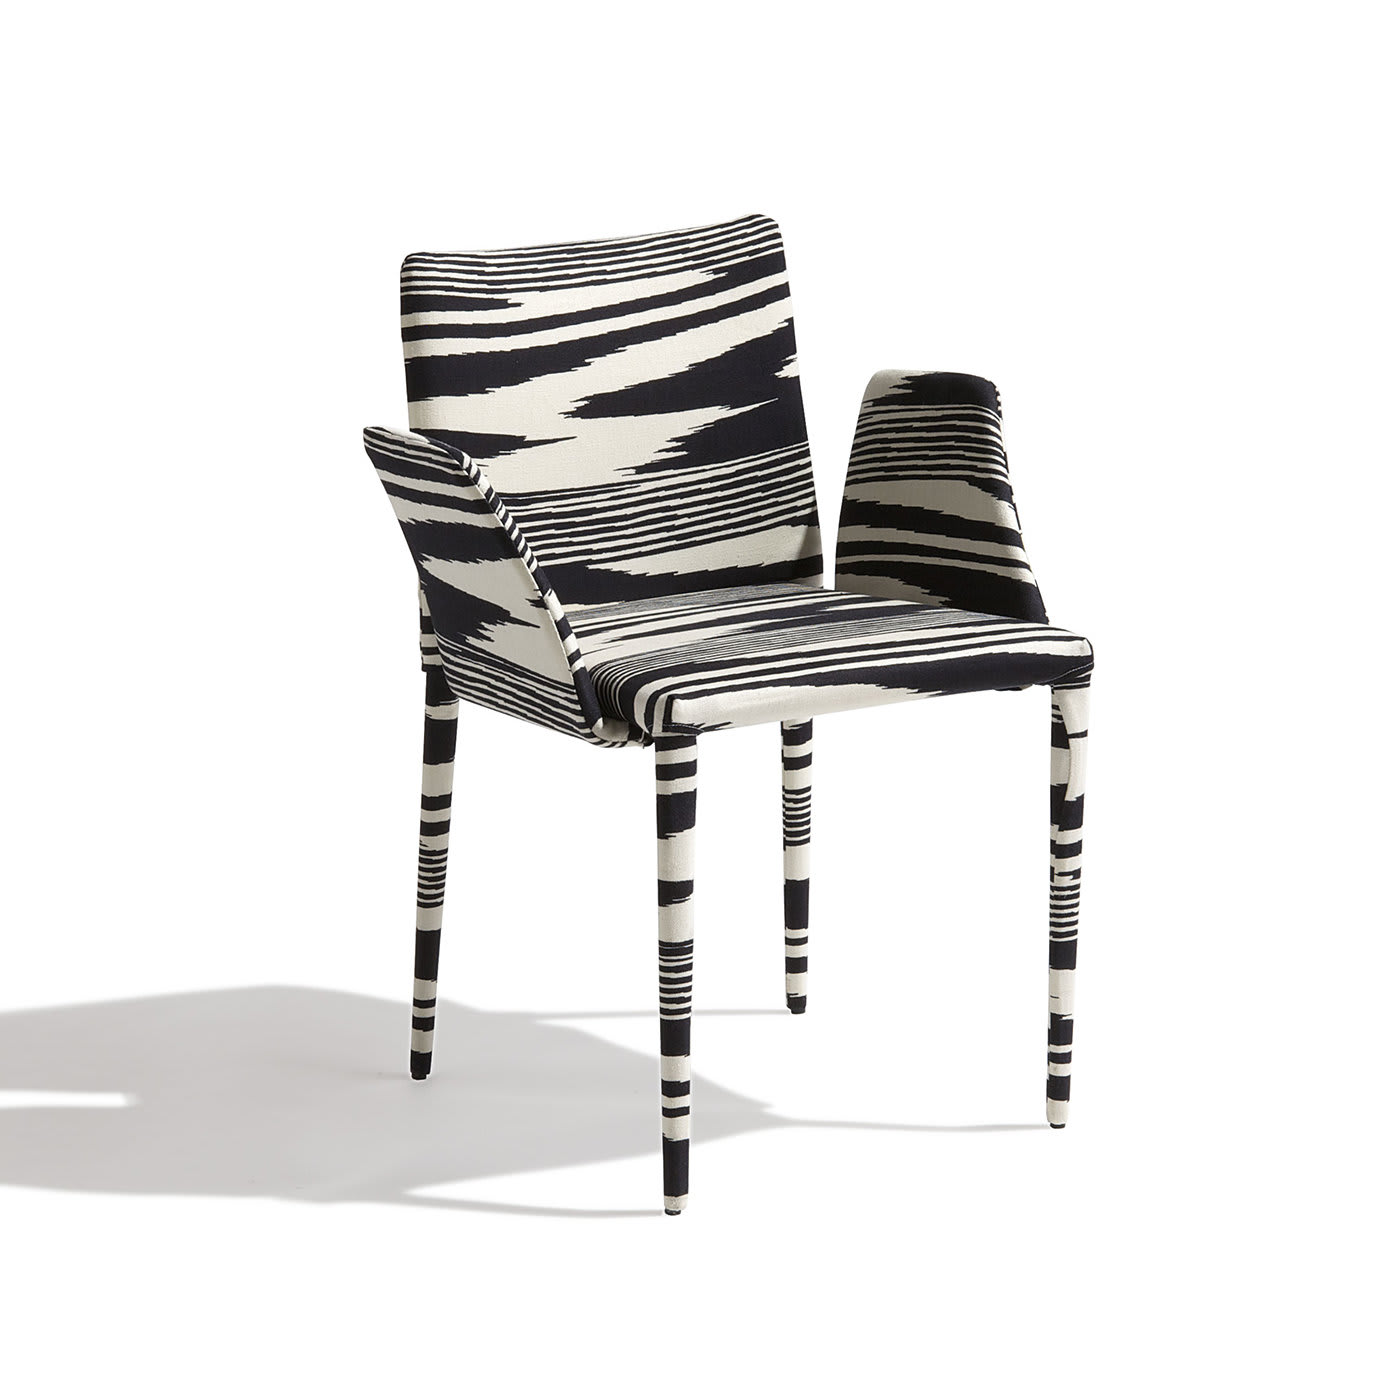 NEUSS MISS CHAIR WITH ARMRESTS - Missoni Home Collection